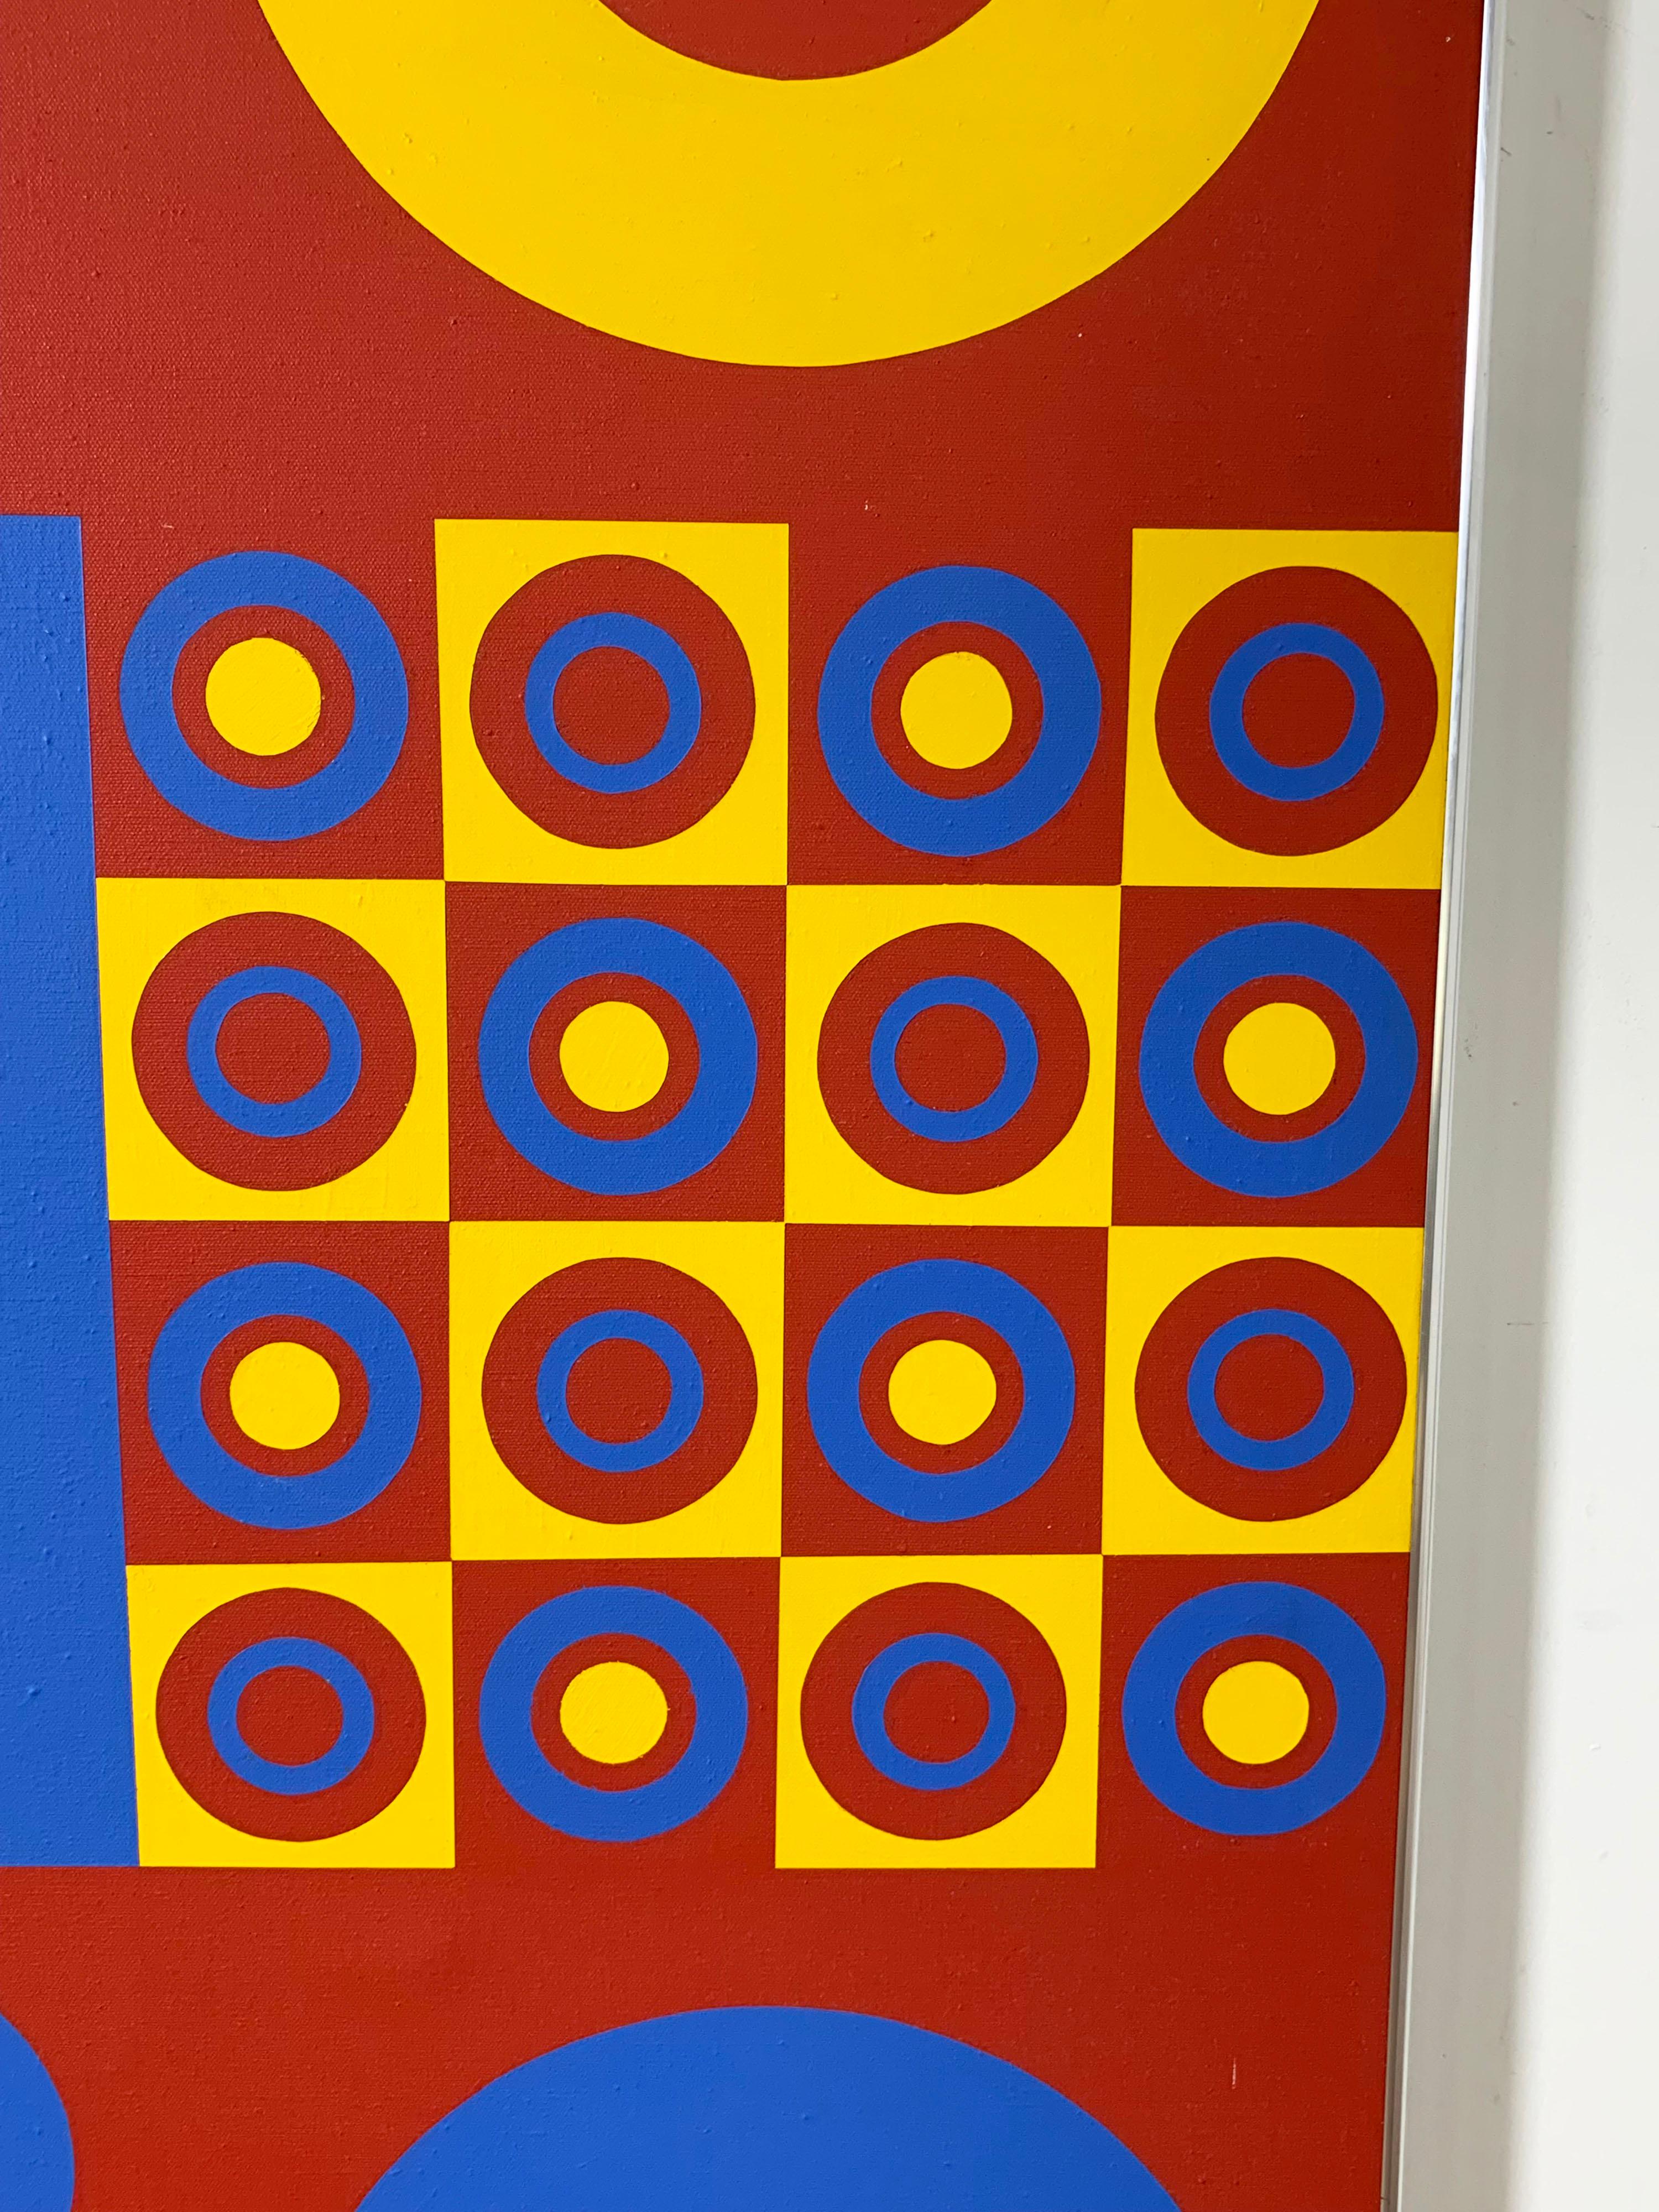 Mid-Century Modern Hard Edge Op Art Painting by Wilma Dick, Circa 1970s For Sale